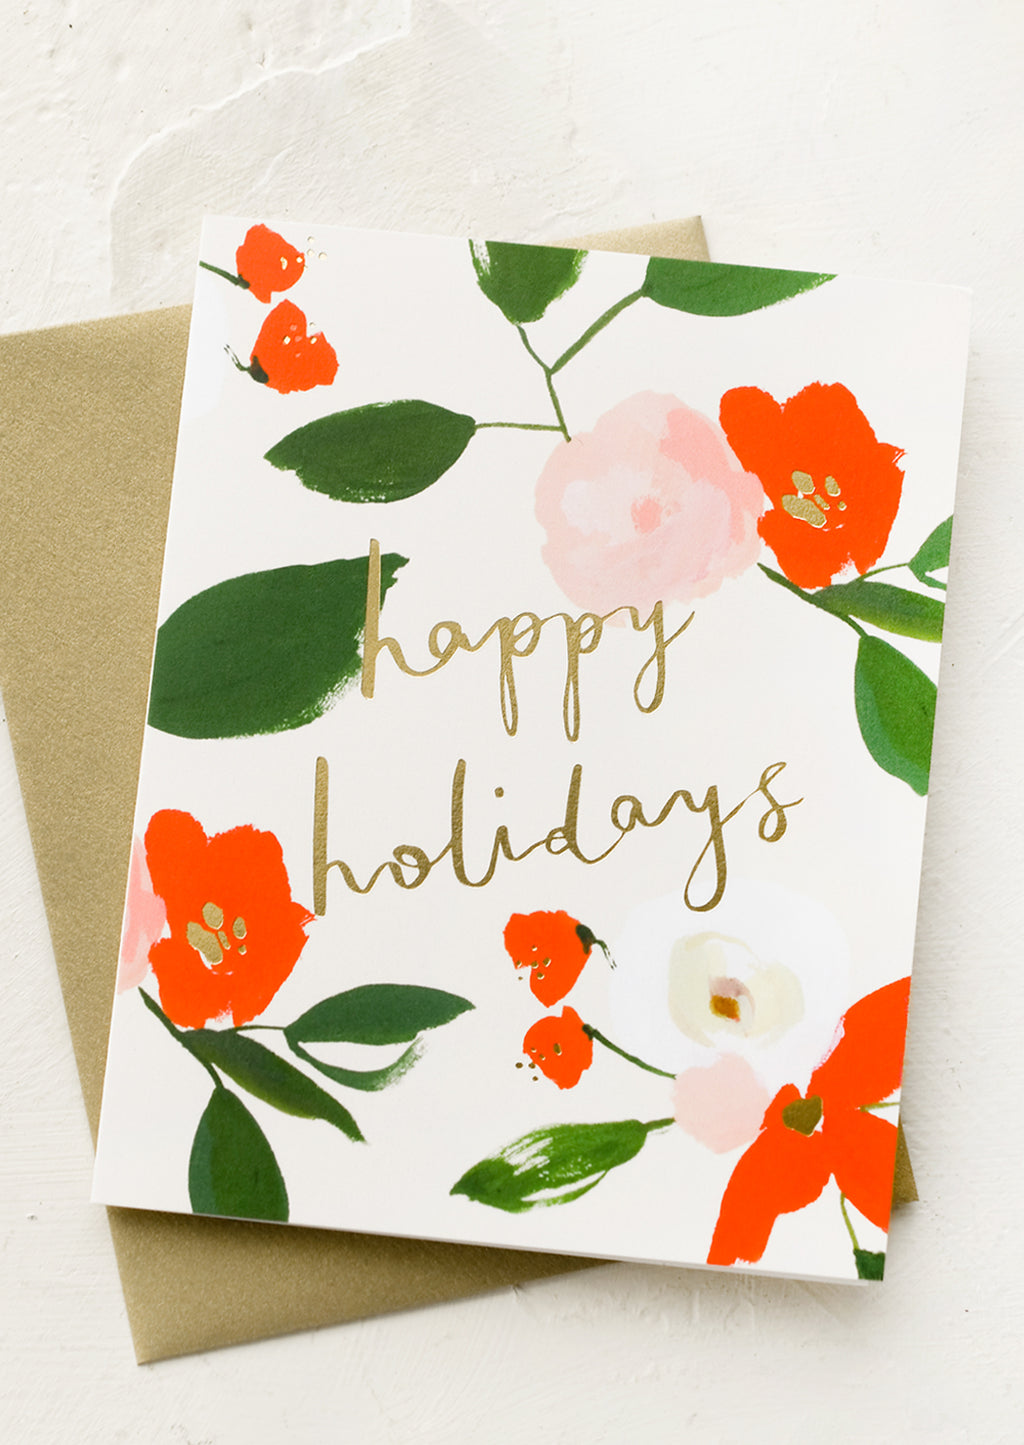 Single Card: A red and green floral print greeting card with "Happy holidays" in gold script.